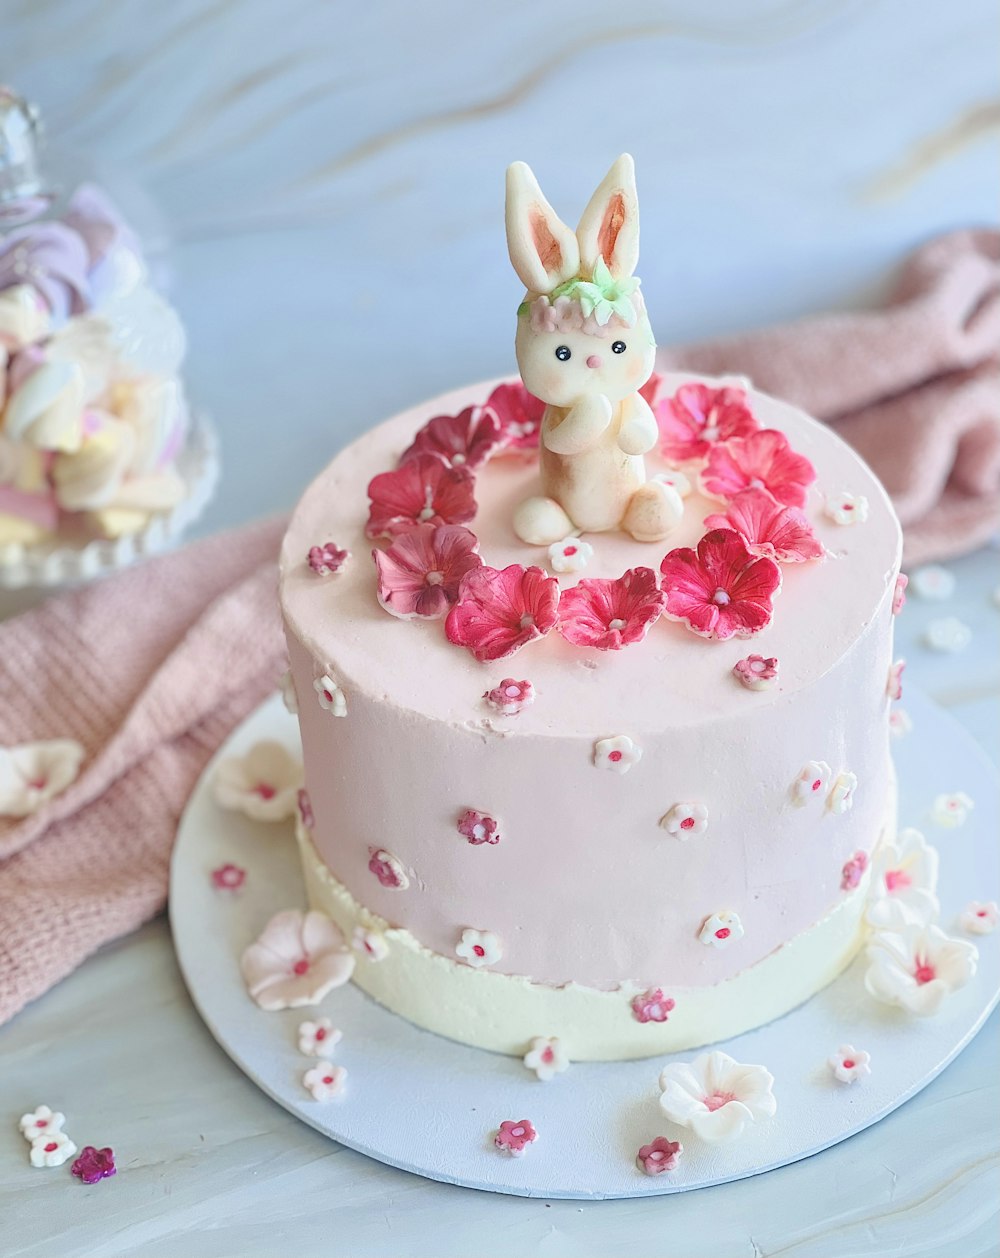 a pink cake with a bunny figurine on top of it